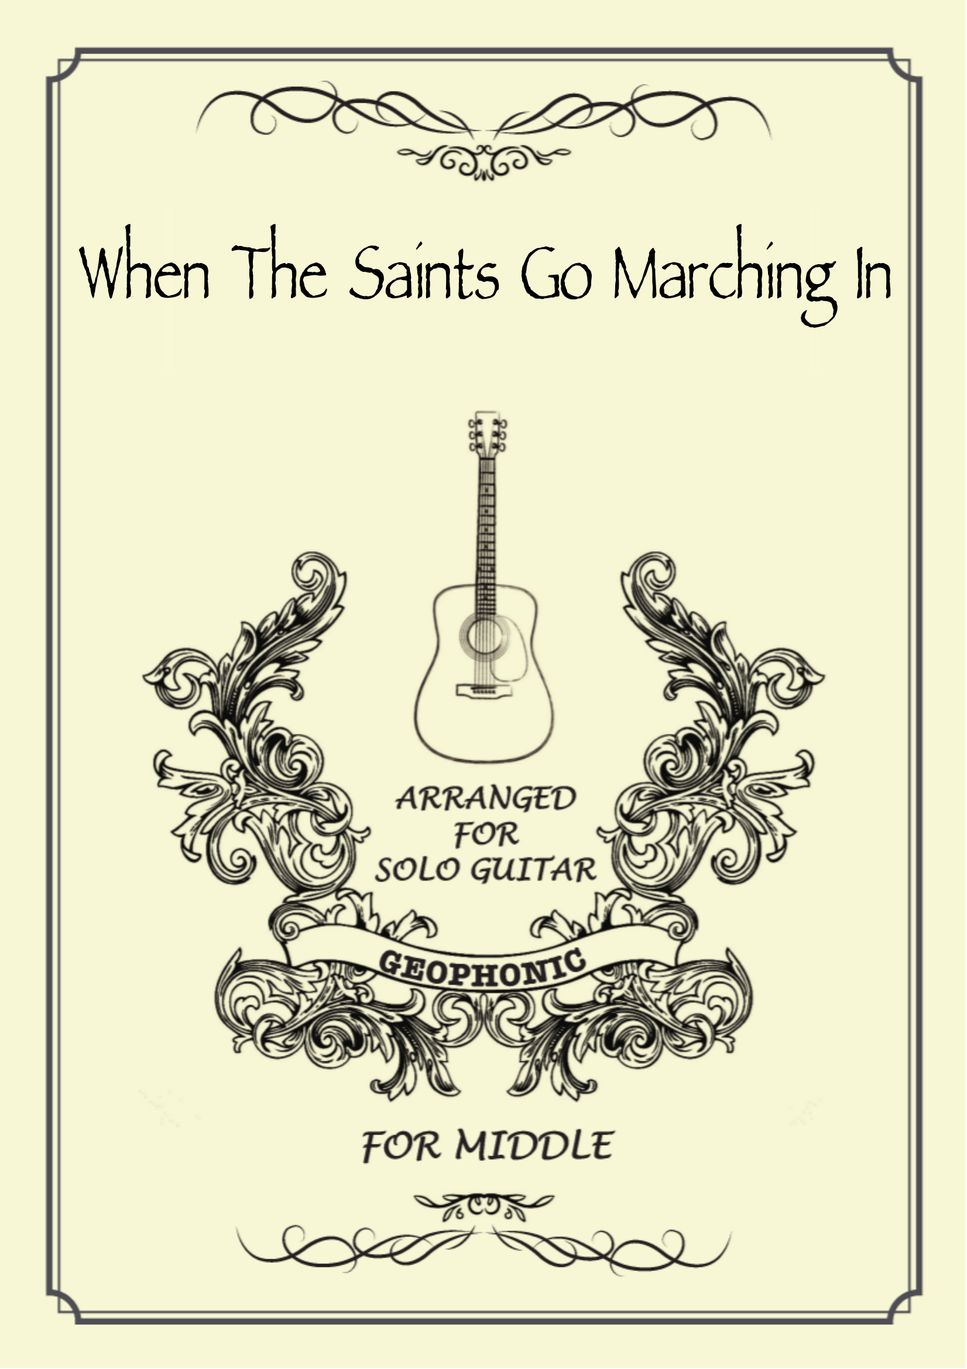 When The Saints Go Marching In by GEOPHONIC